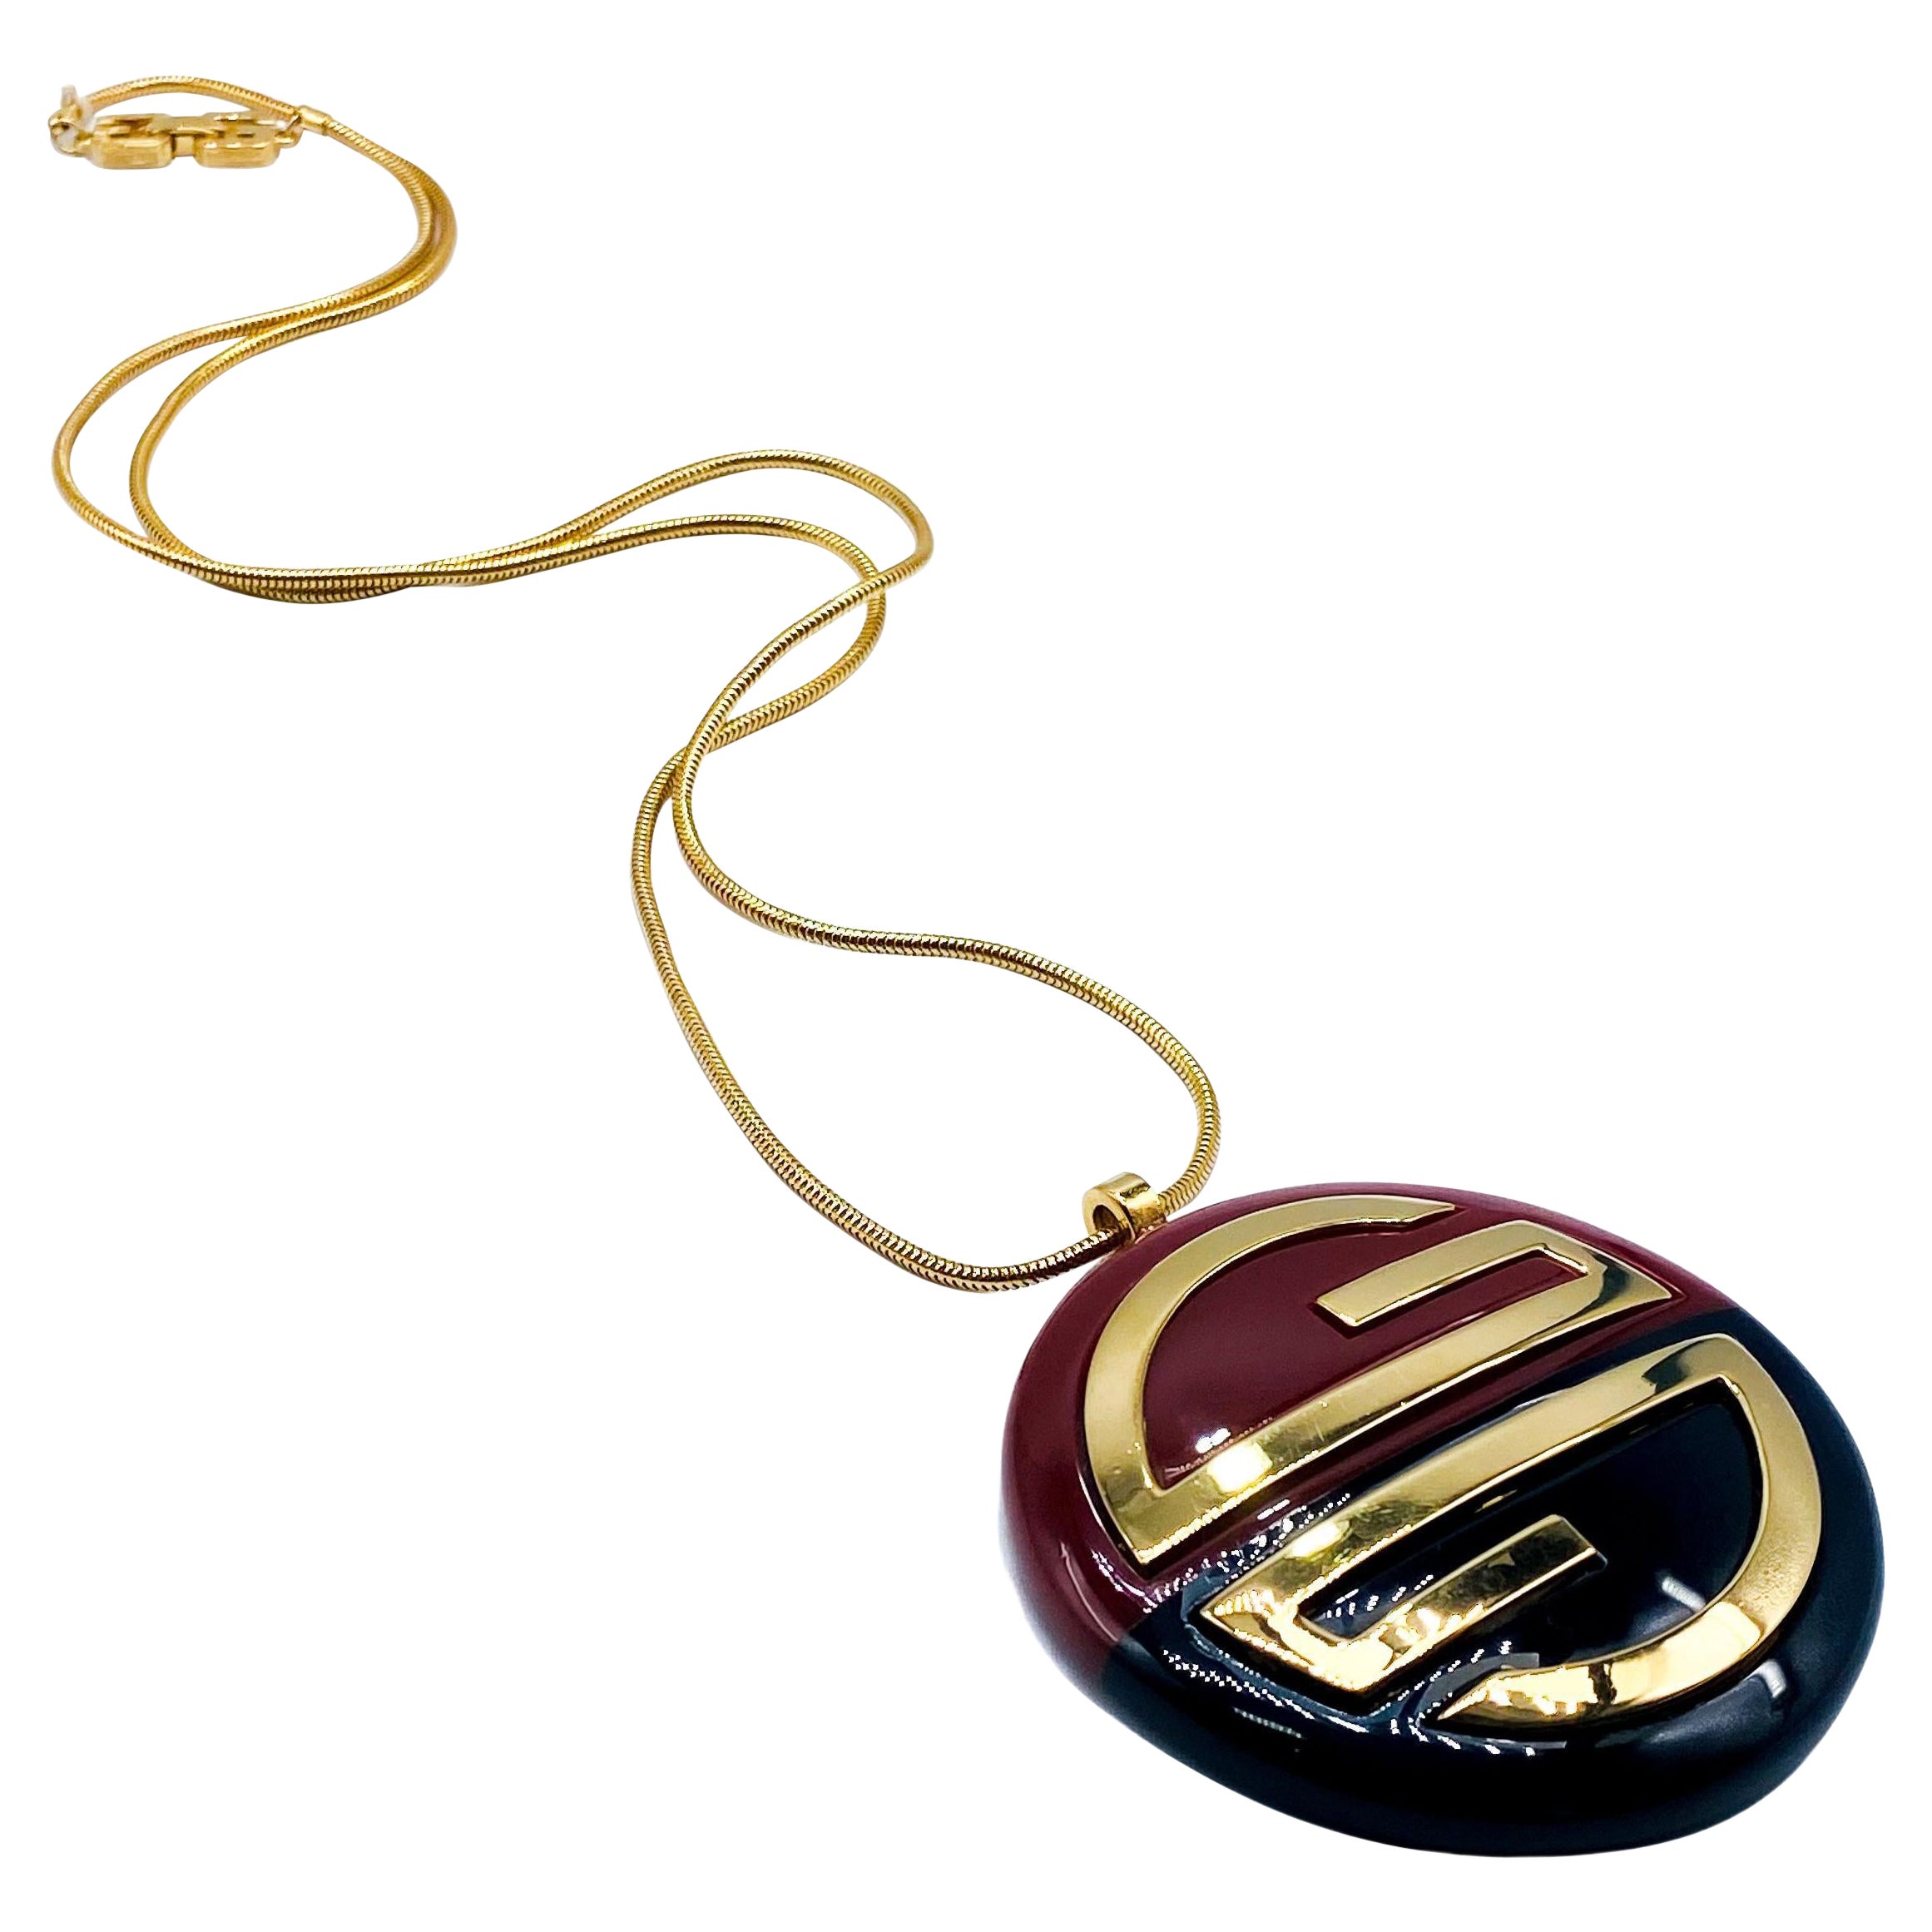 Vintage Givenchy Pendant Necklace 1970s - 1977 Collection For Sale